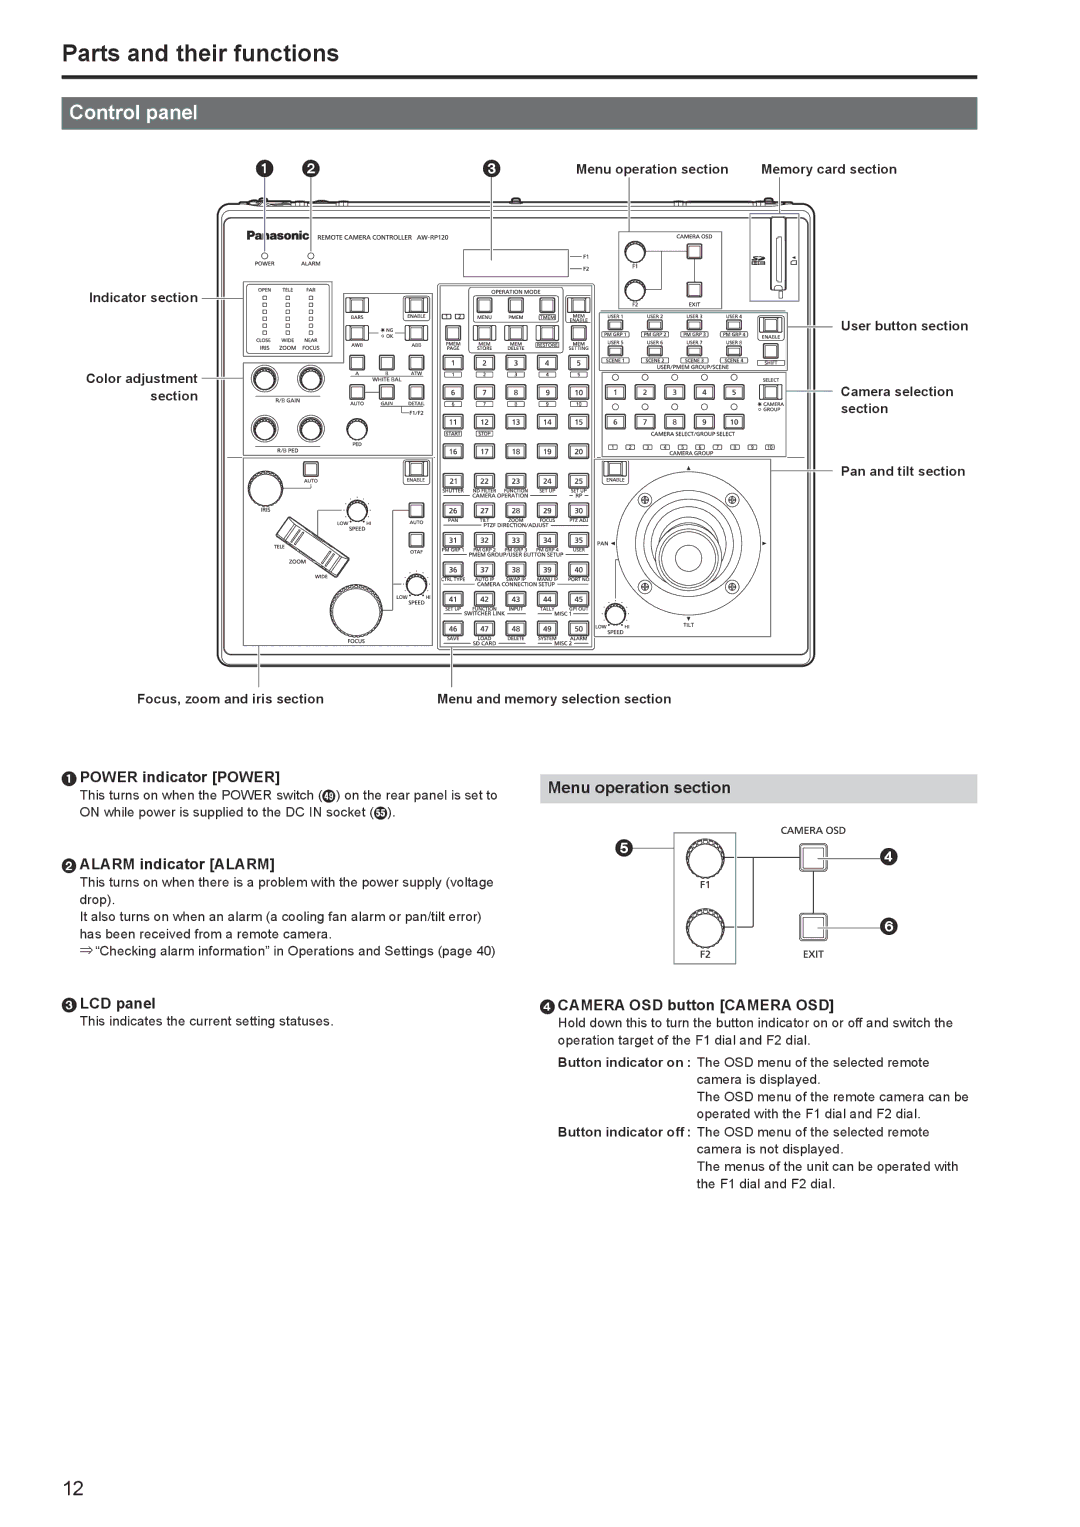 Panasonic AW-RP120G operating instructions Parts and their functions, Control panel, Menu operation section 